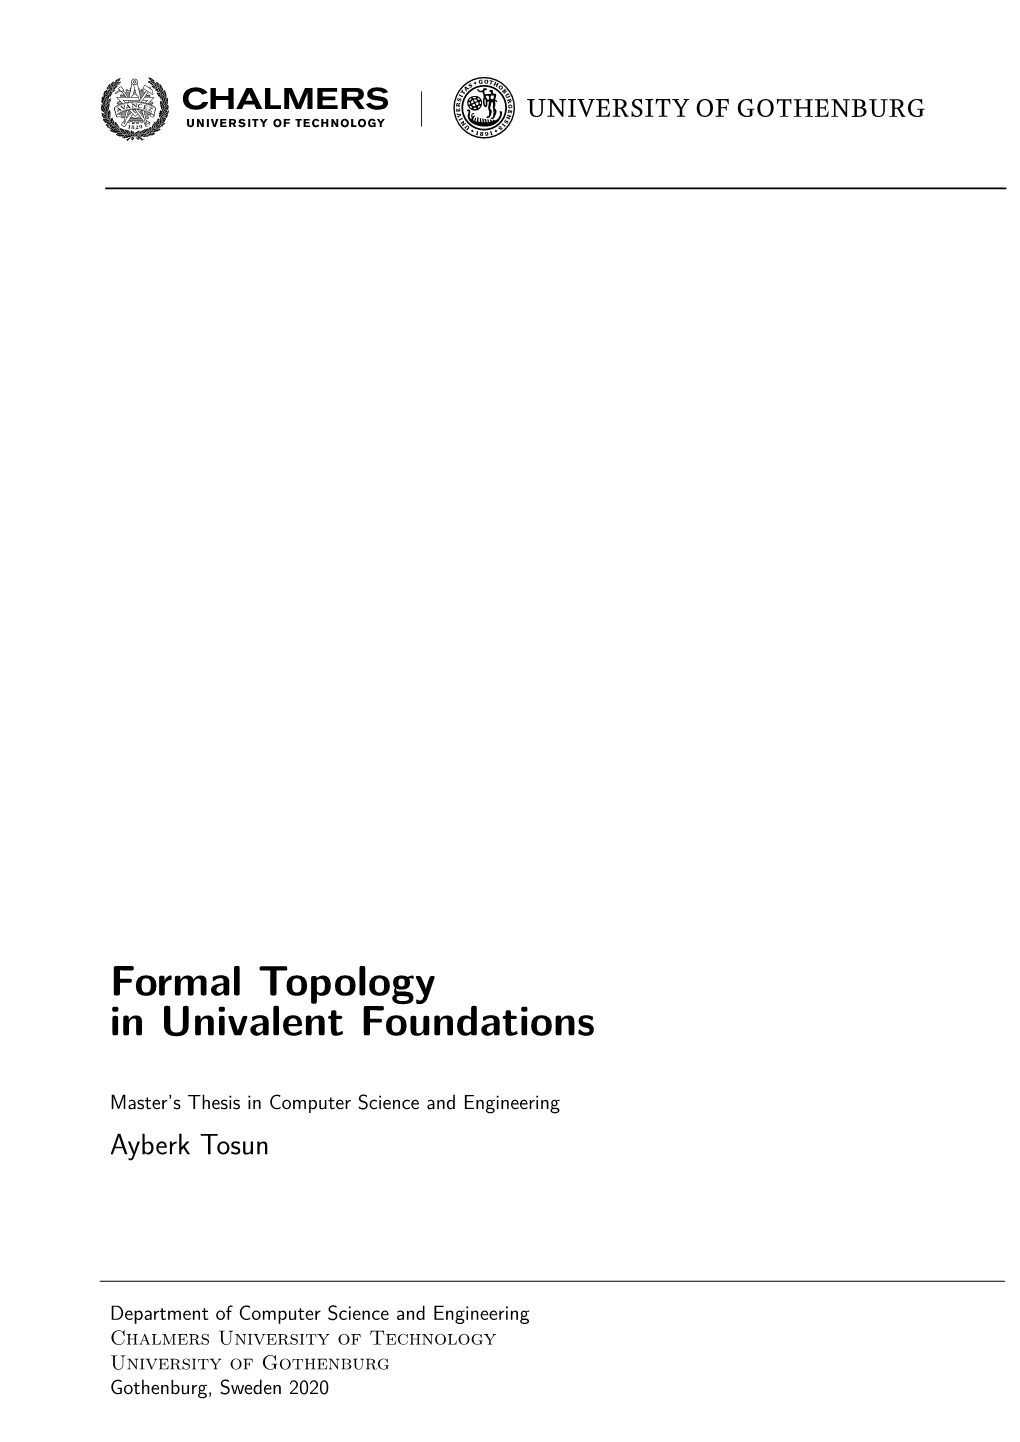 Formal Topology in Univalent Foundations